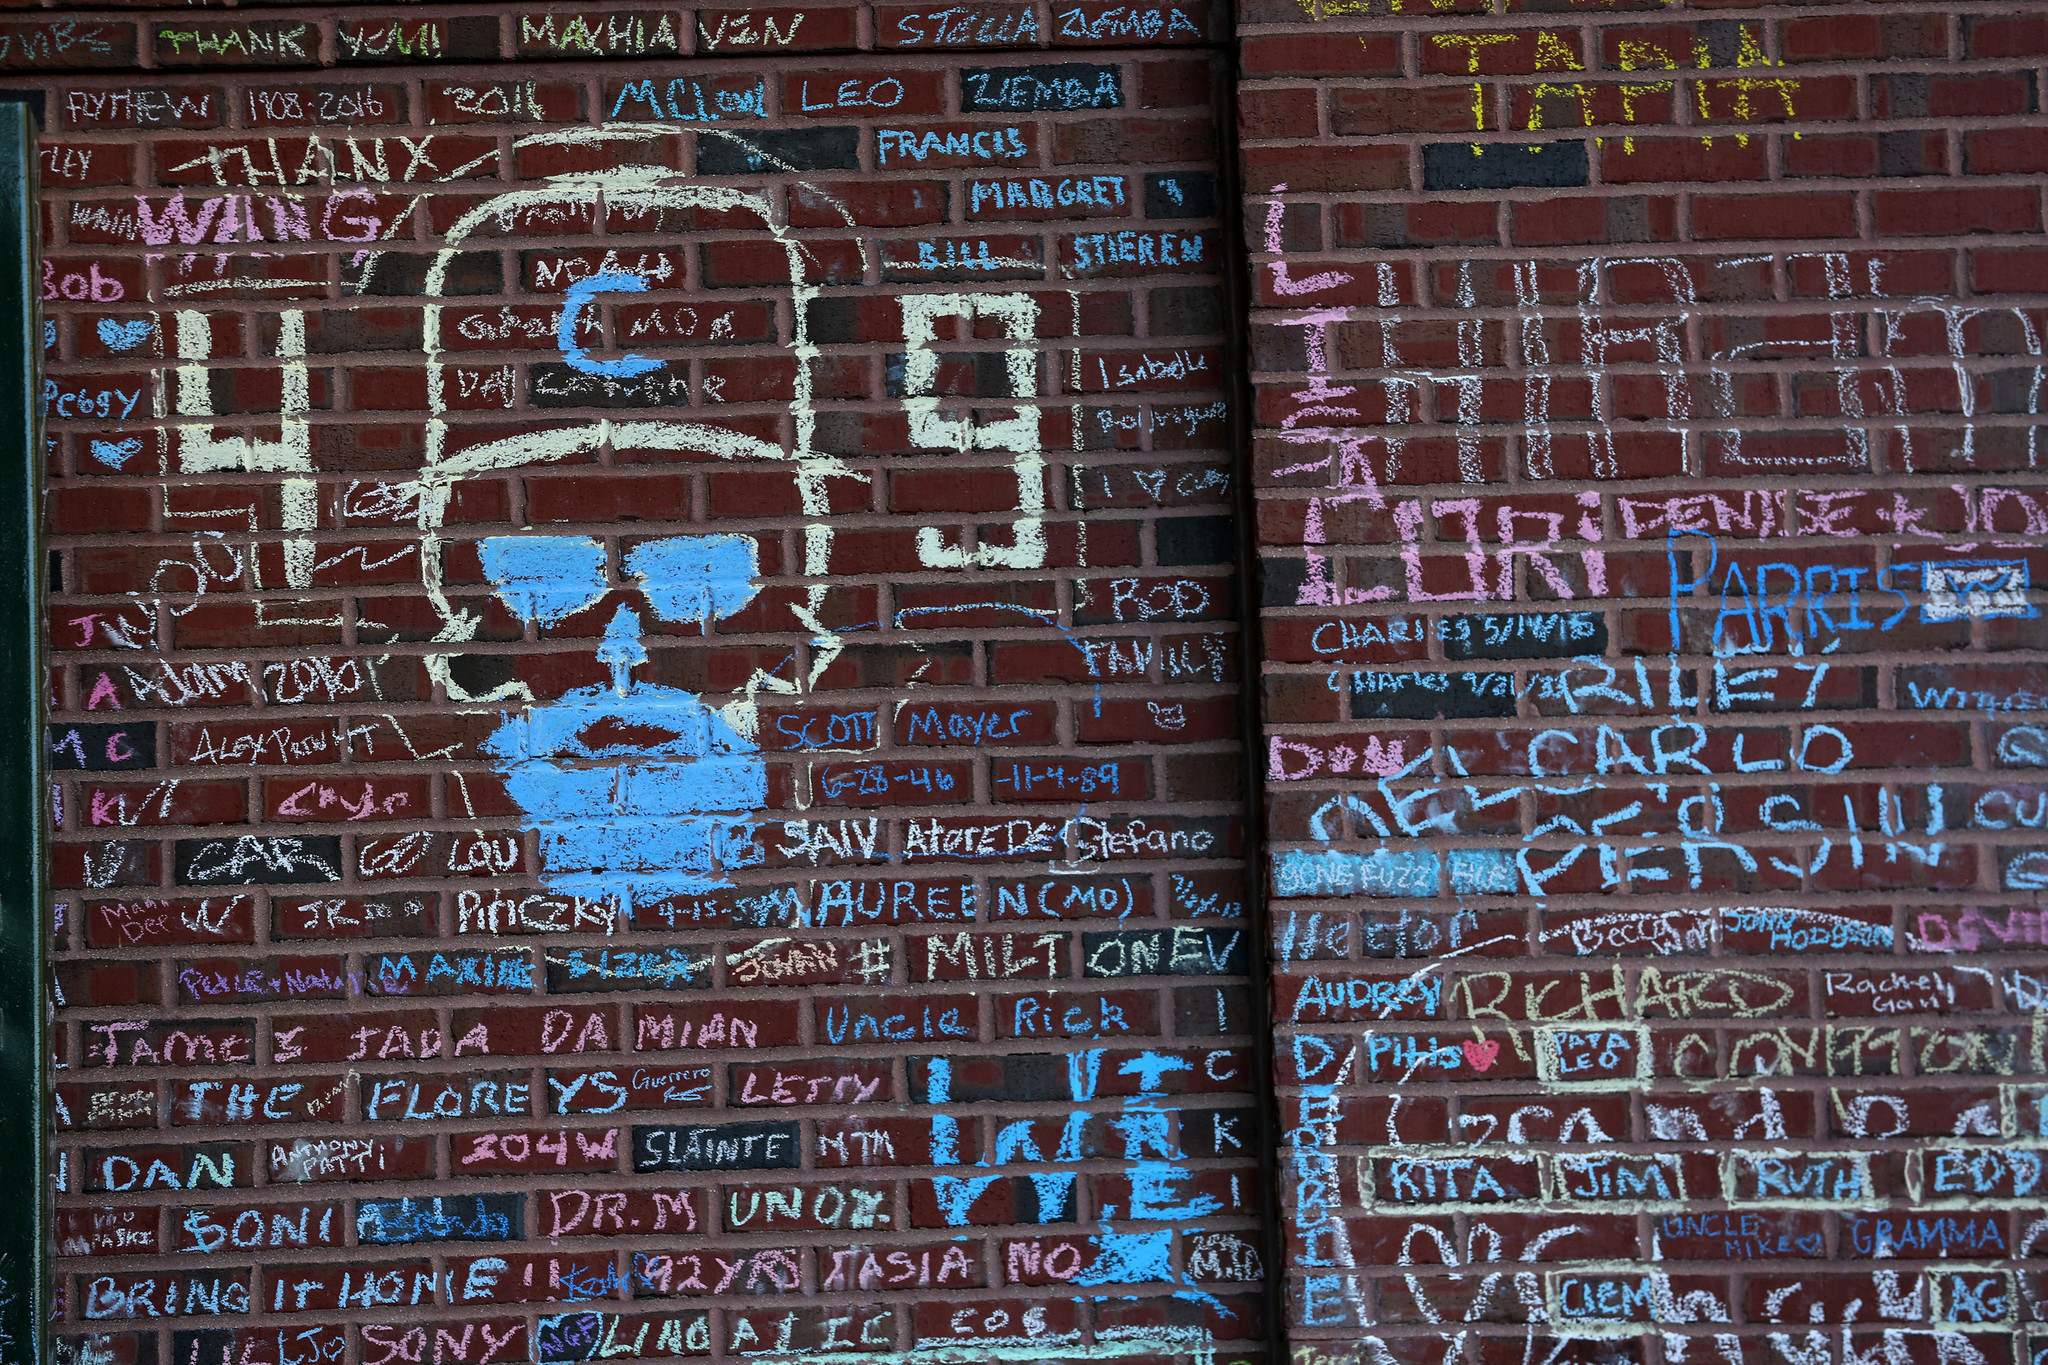 Chalk messages on the Wrigley Field wall - Chicago Tribune2048 x 1365